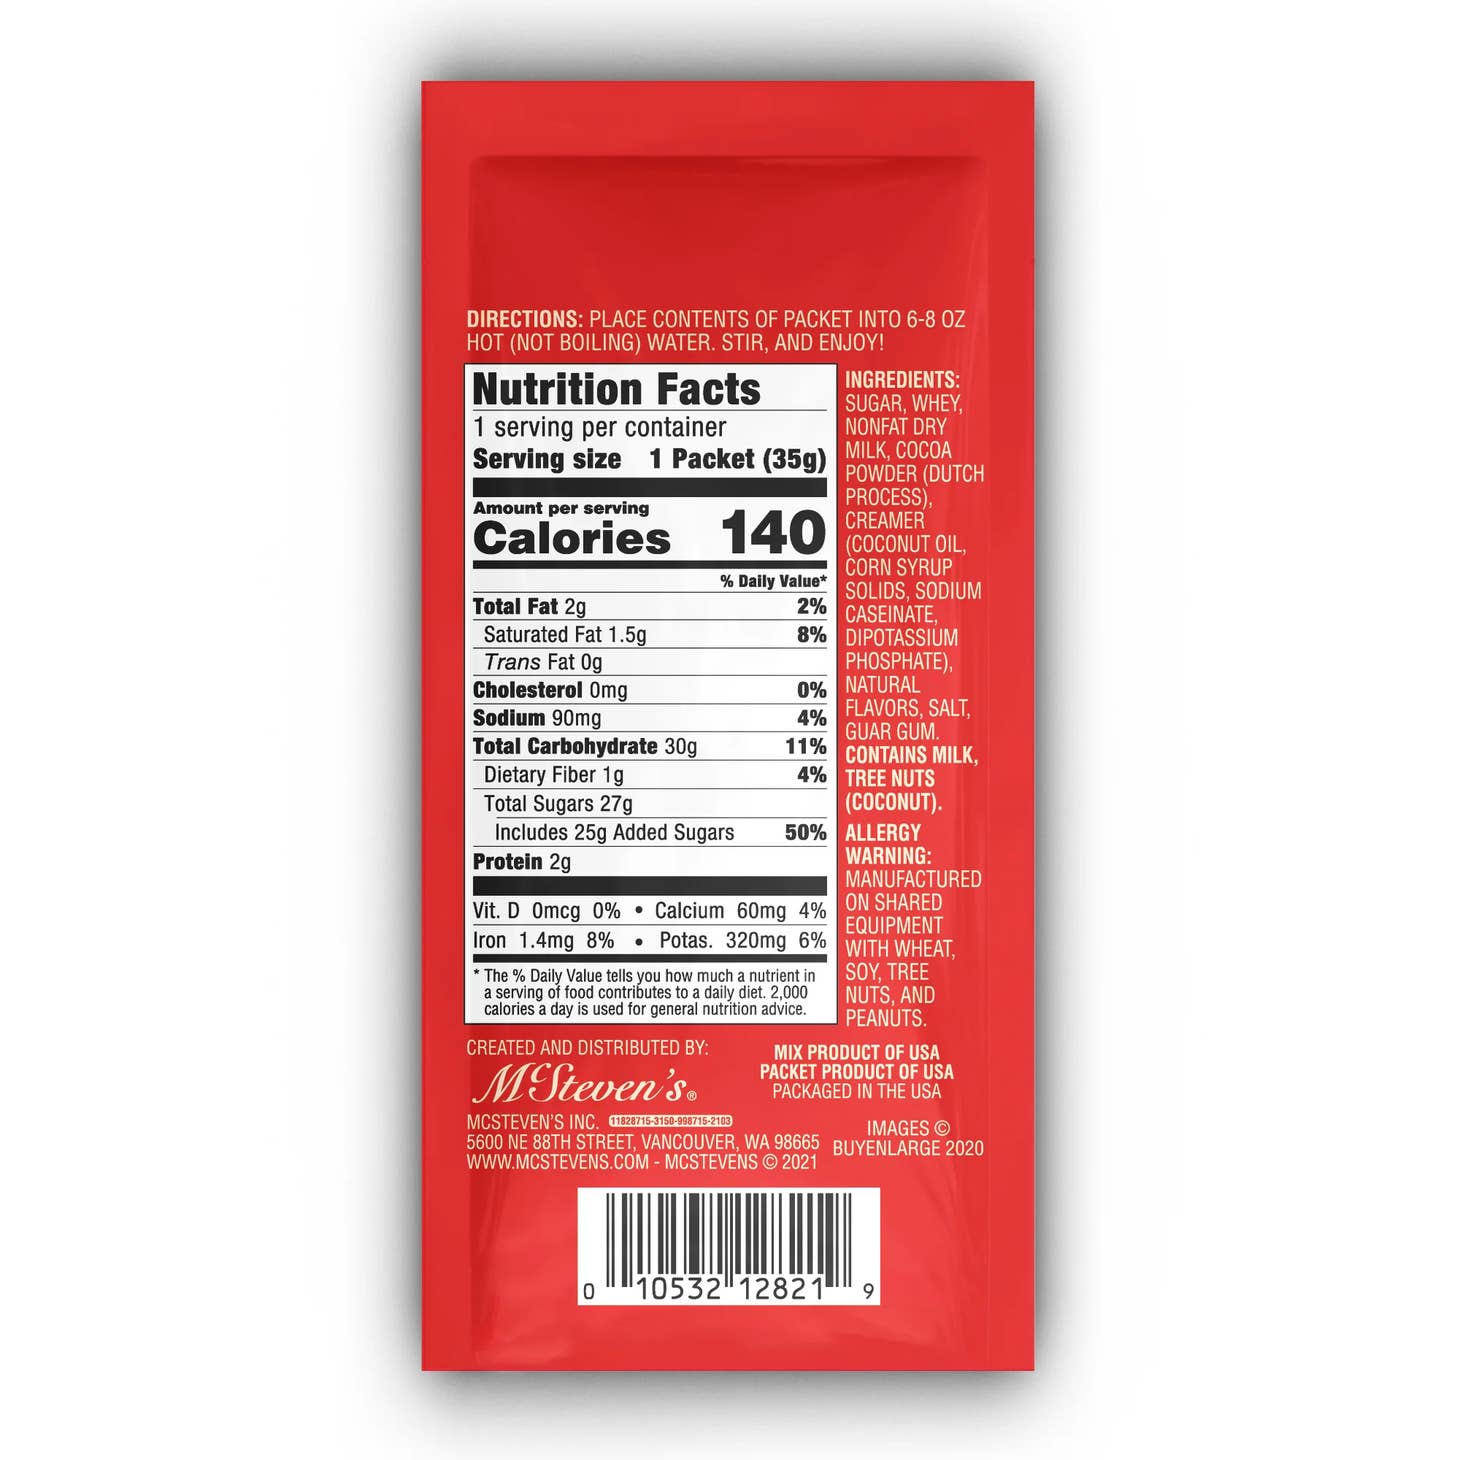 Image of the back of packet showing nurtrition facts and ingredient list. Please call 501-327-2182 for more information.